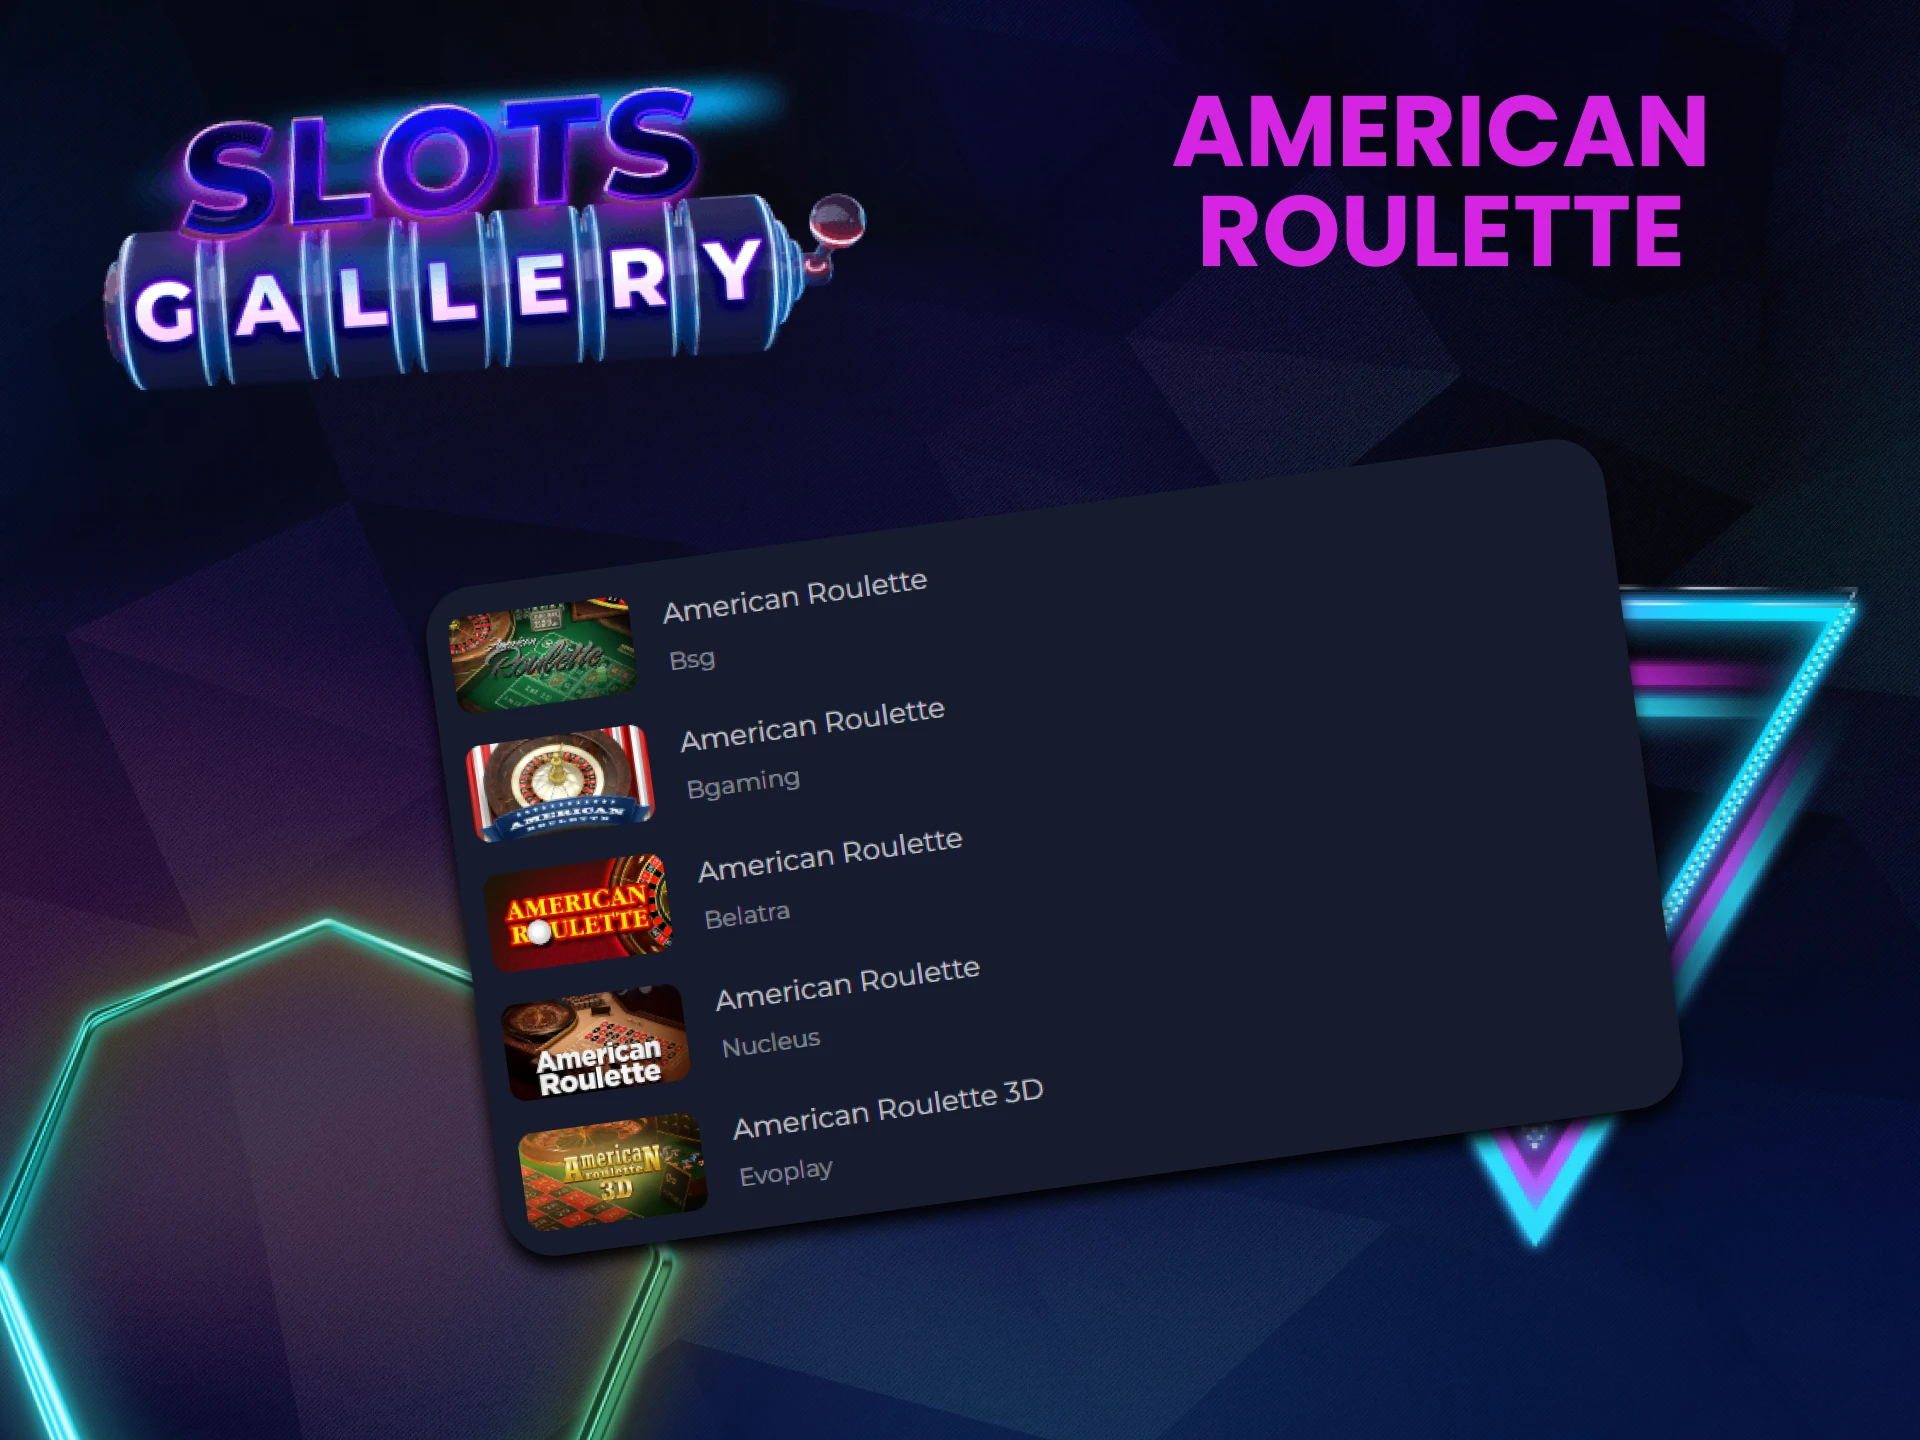 Play American Roulette at Slots Gallery.